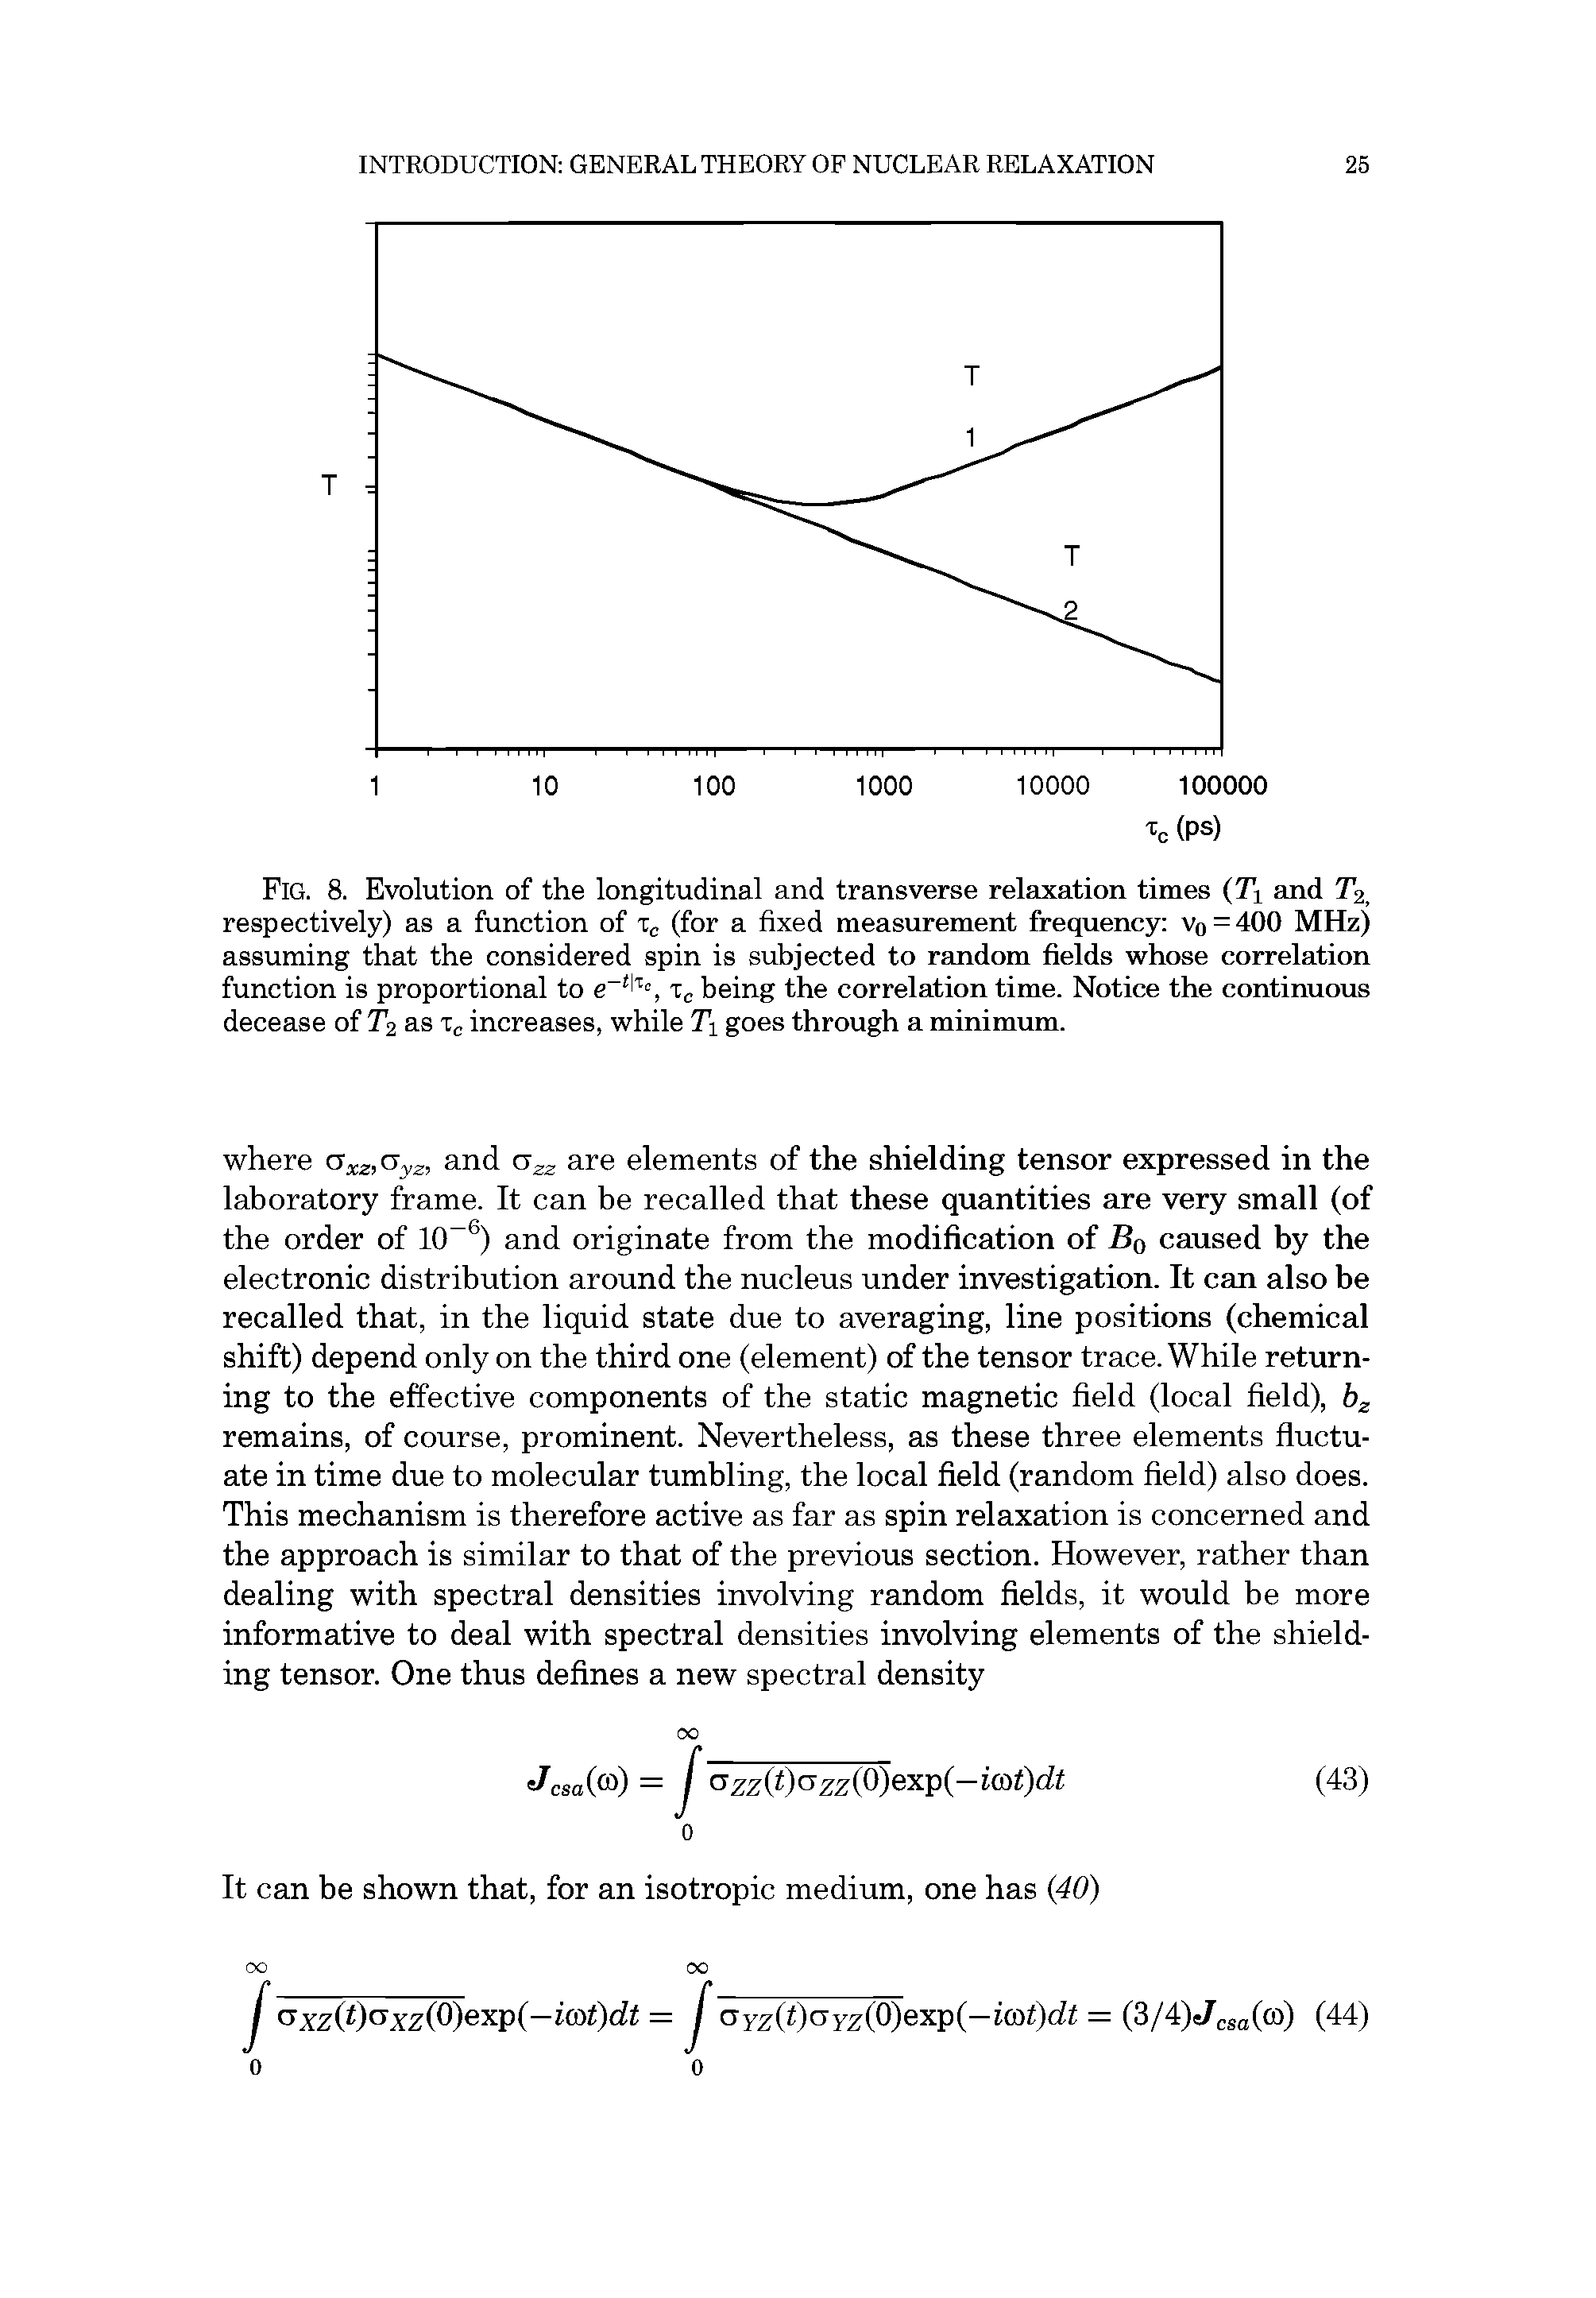 Fig. 8. Evolution of the longitudinal and transverse relaxation times (Ti and T2, respectively) as a function of (for a fixed measurement frequency Vo = 400 MHz) assuming that the considered spin is subjected to random fields whose correlation function is proportional to being the correlation time. Notice the continuous...